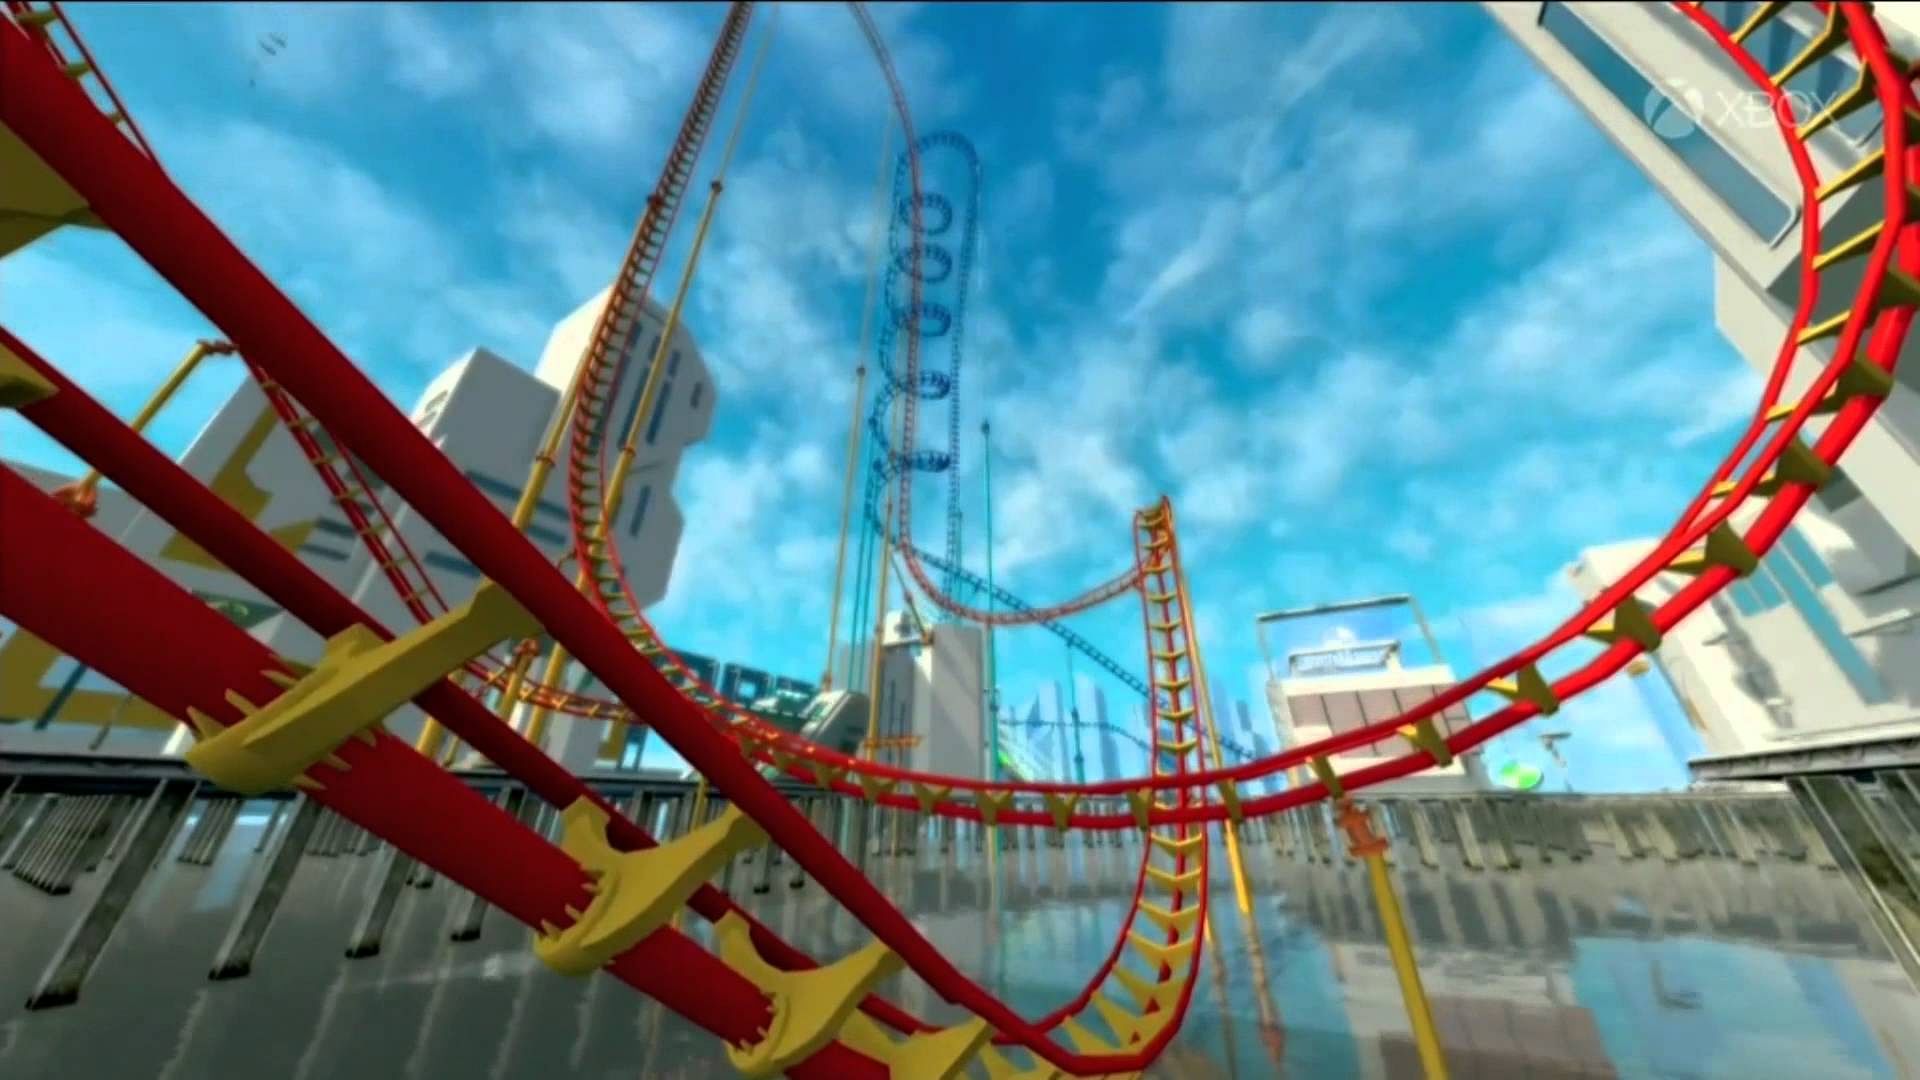 Build your own Roller Coaster using Screamride from March 3